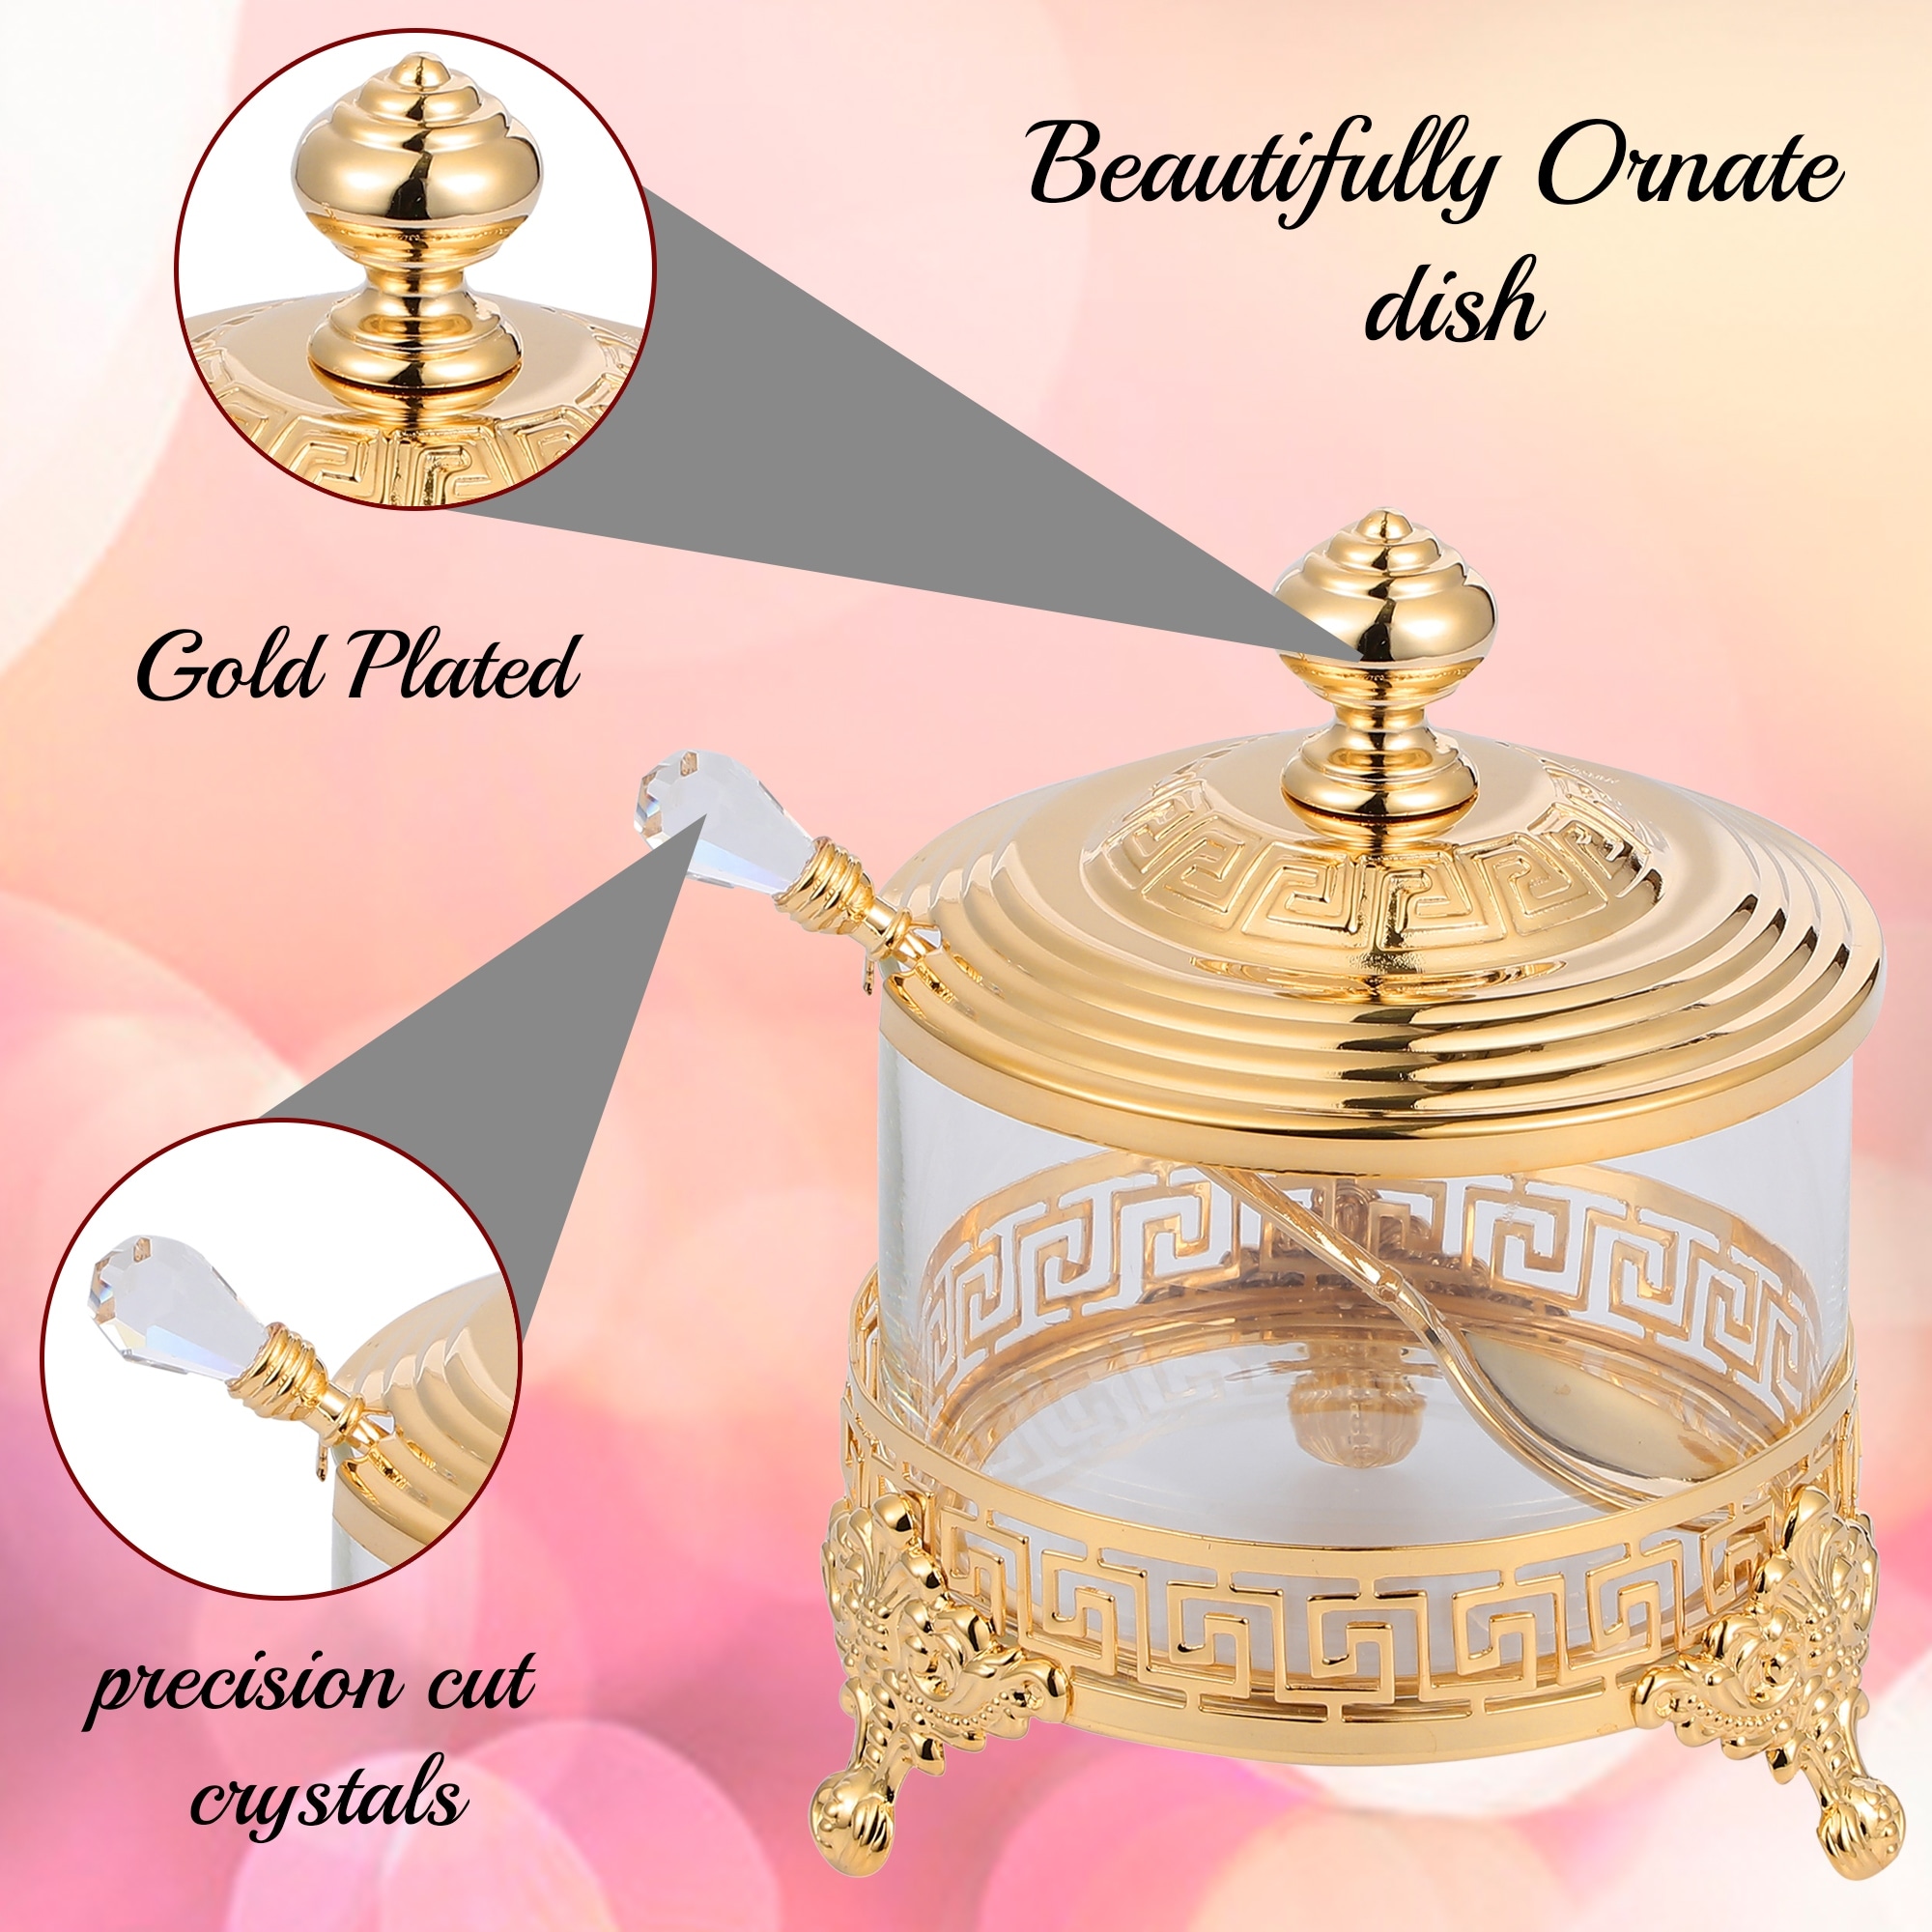 https://ak1.ostkcdn.com/images/products/is/images/direct/61ee7df1554ddc66a9fb13e795ca8703c3a4984e/24K-Gold-Plated-Sugar-Bowl%2C-Honey-Dish%2C-Candy-Dish-Glass-Bowl---Contemporary-Design-by-Matashi.jpg